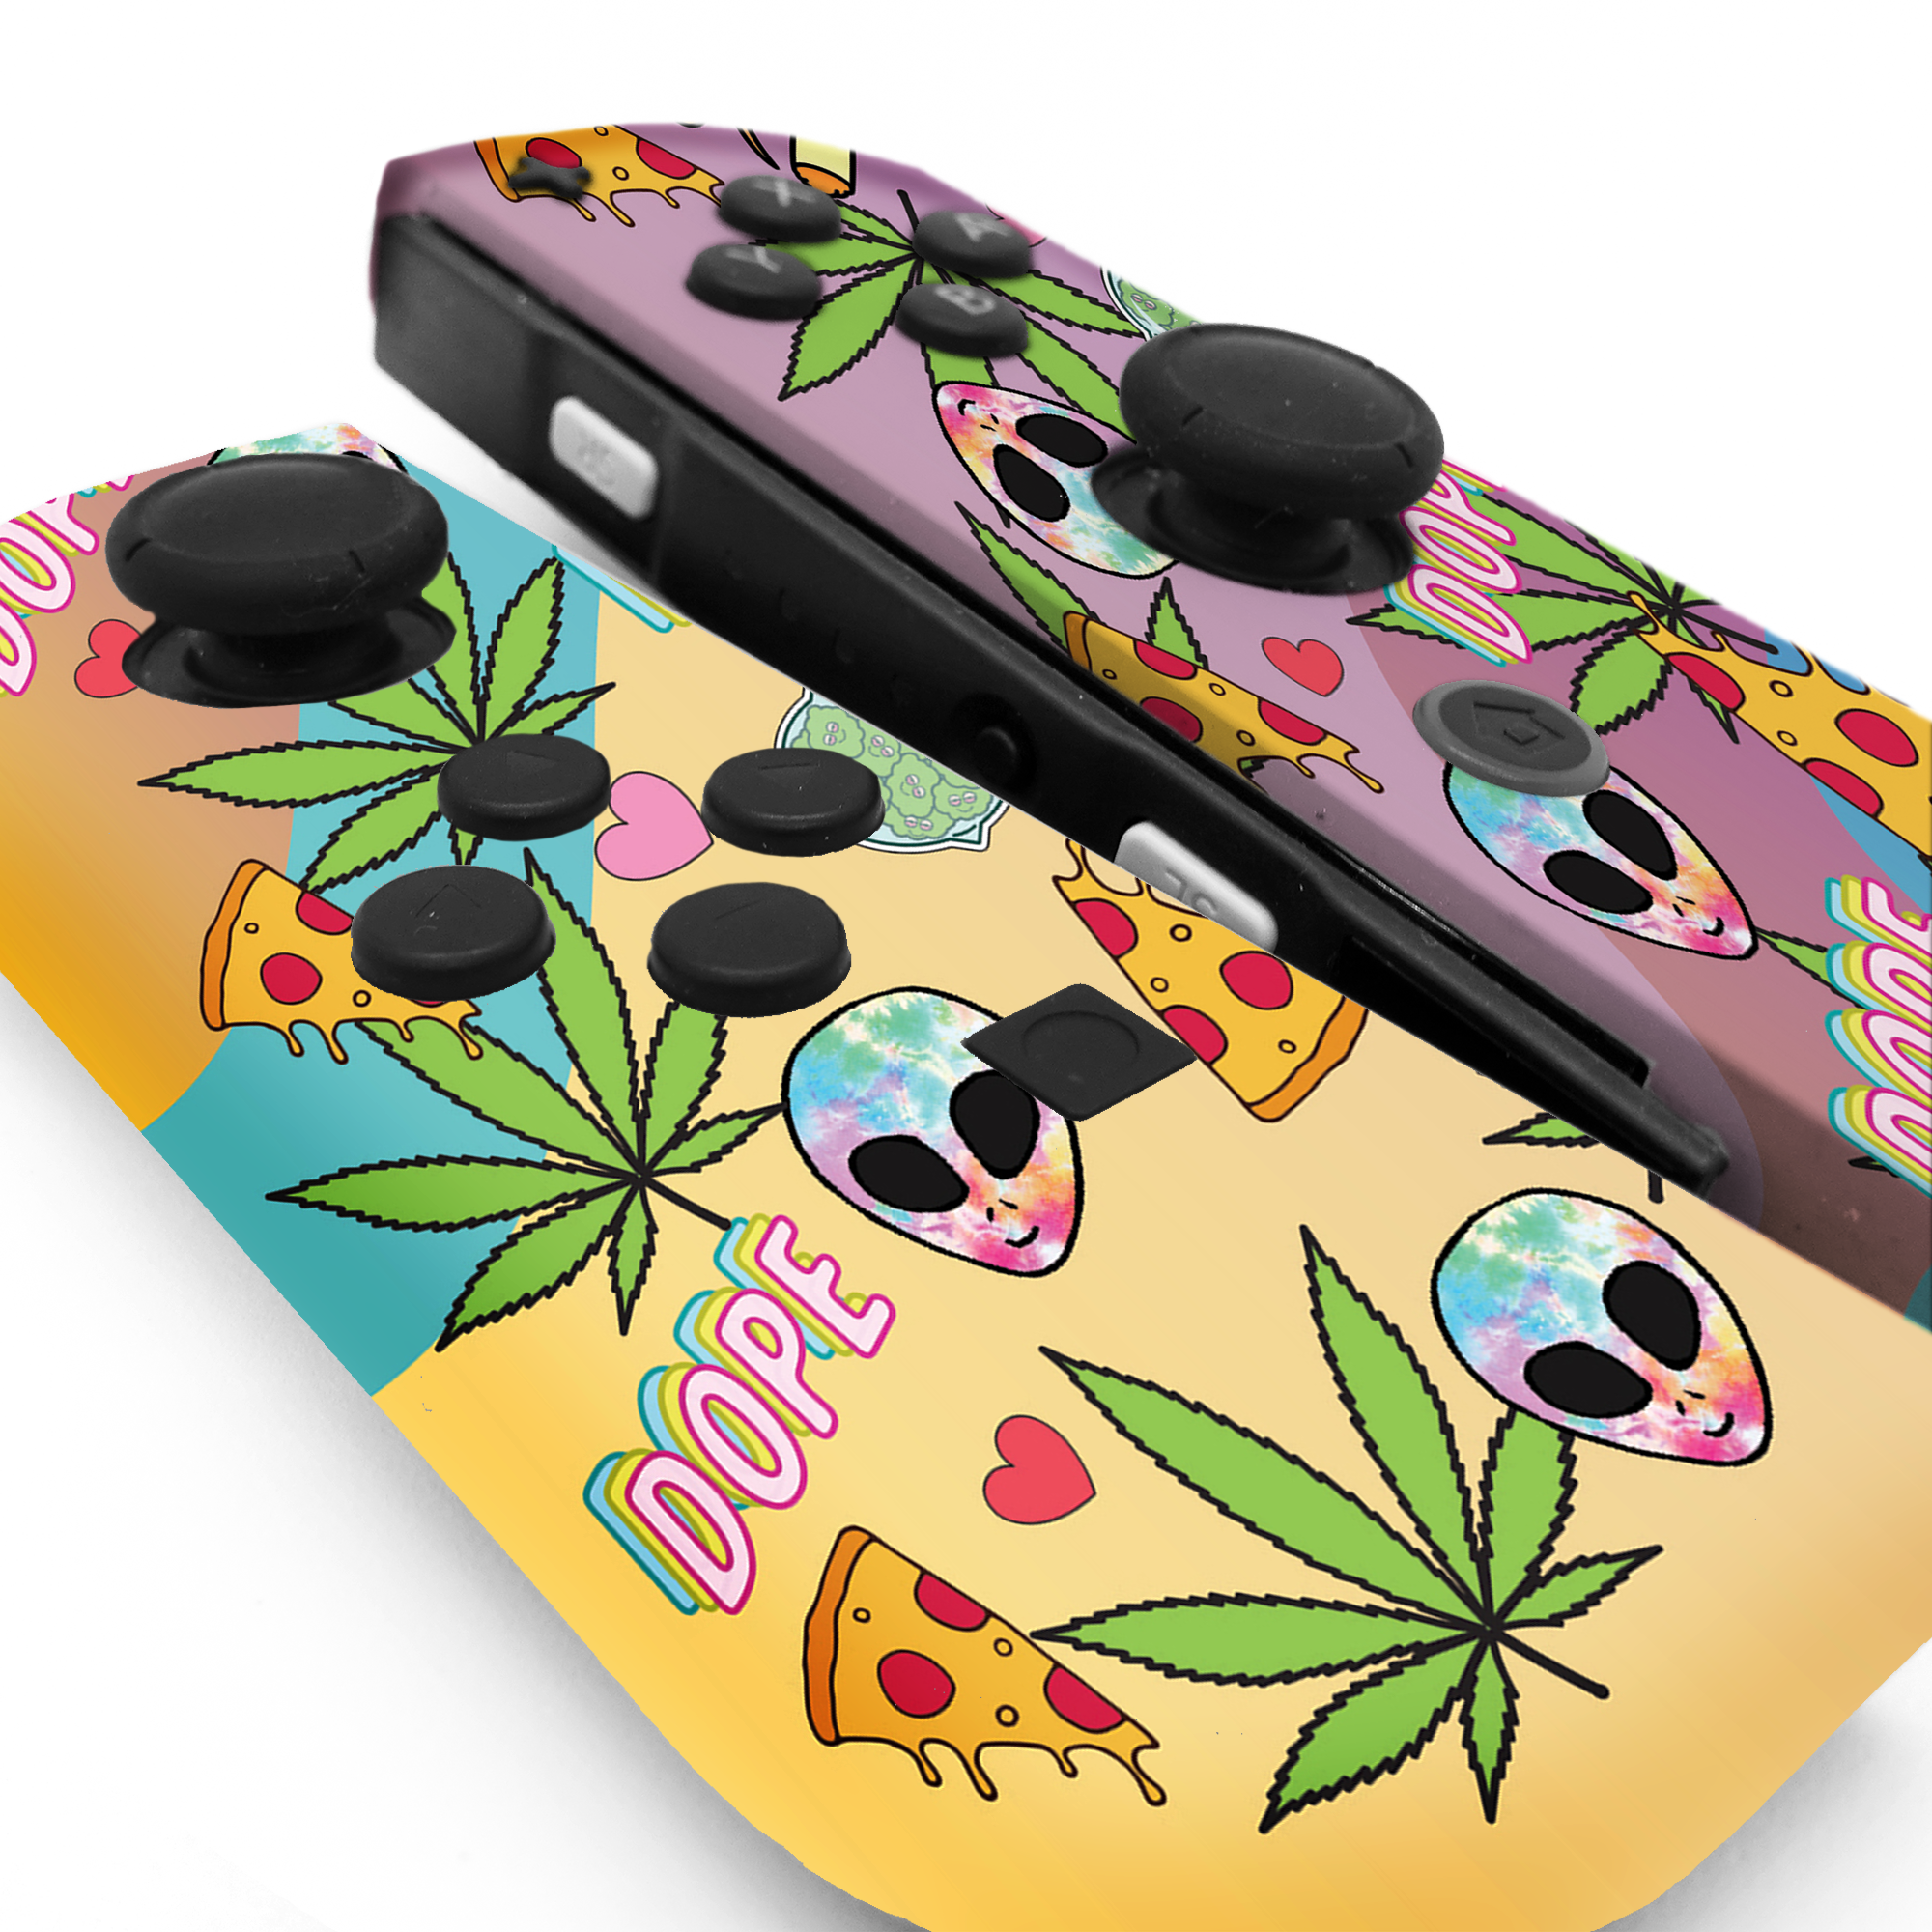 Vaporwave Valentine Joy-Con Left and Right Switch Controllers by Nintendo